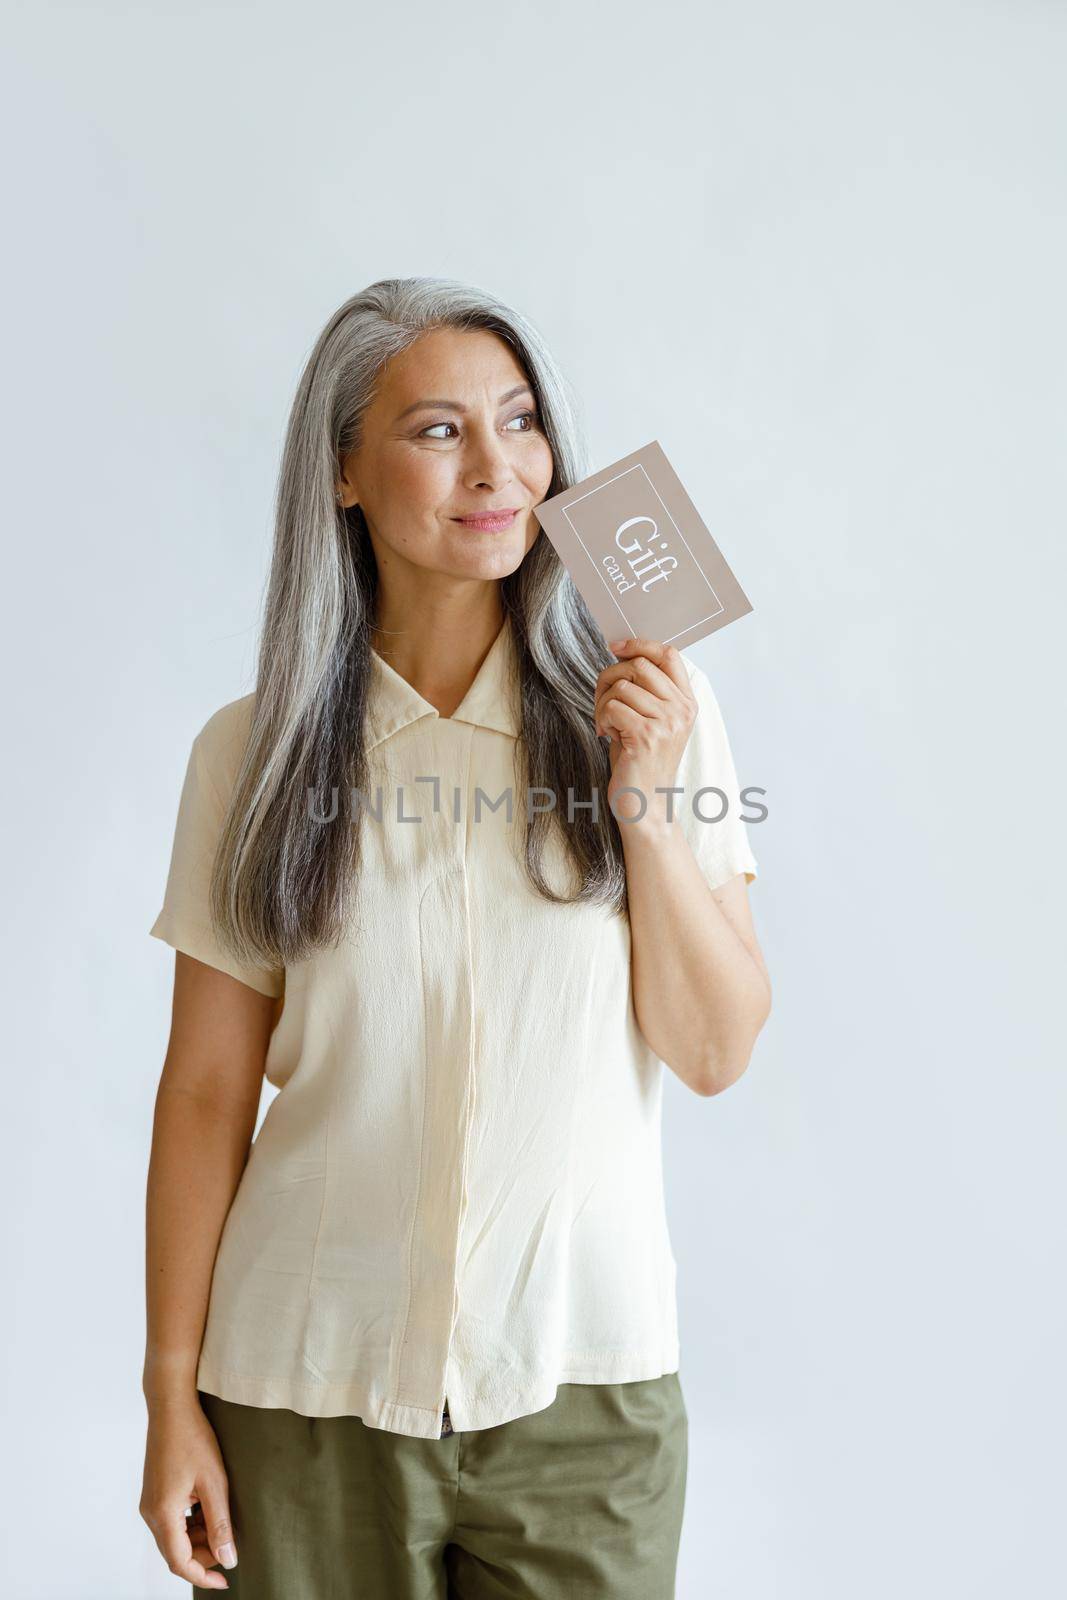 Thoughtful hoary haired Asian lady customer holds gift card standing on light grey background by Yaroslav_astakhov